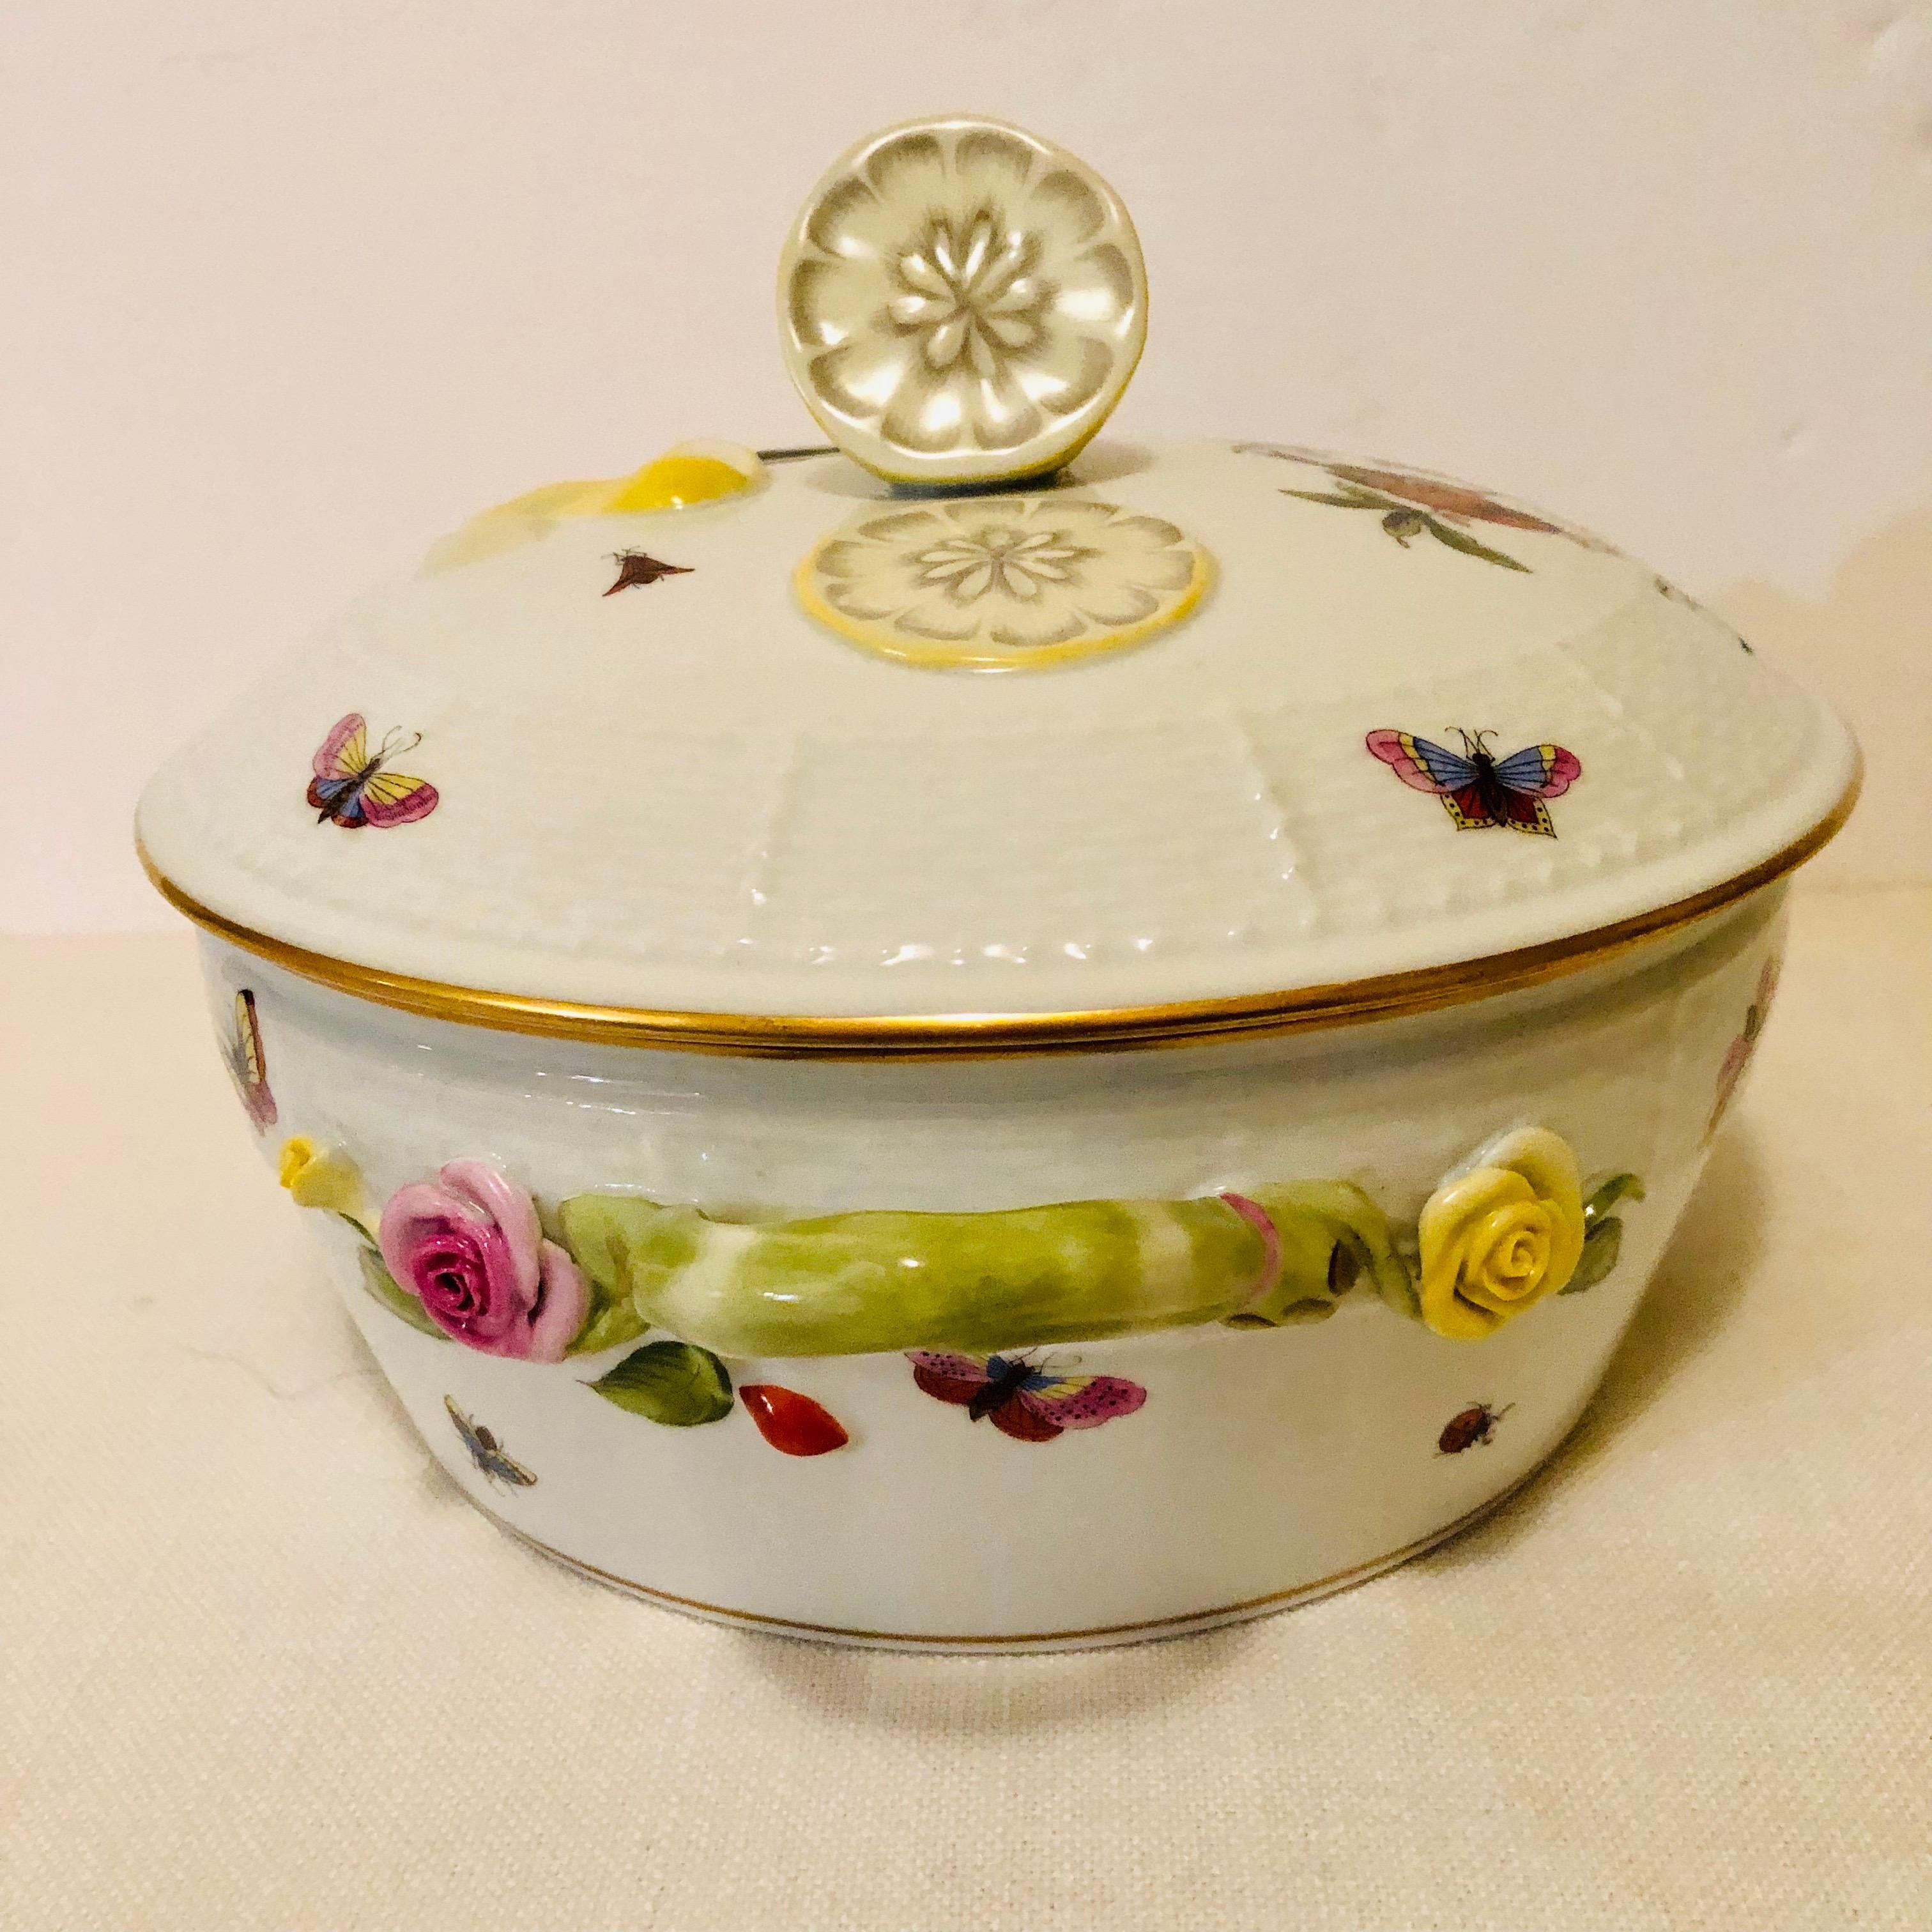 Hand-Painted Hand Painted Herend Rothschild Bird Covered Bowl with a Raised Lemon on the Top